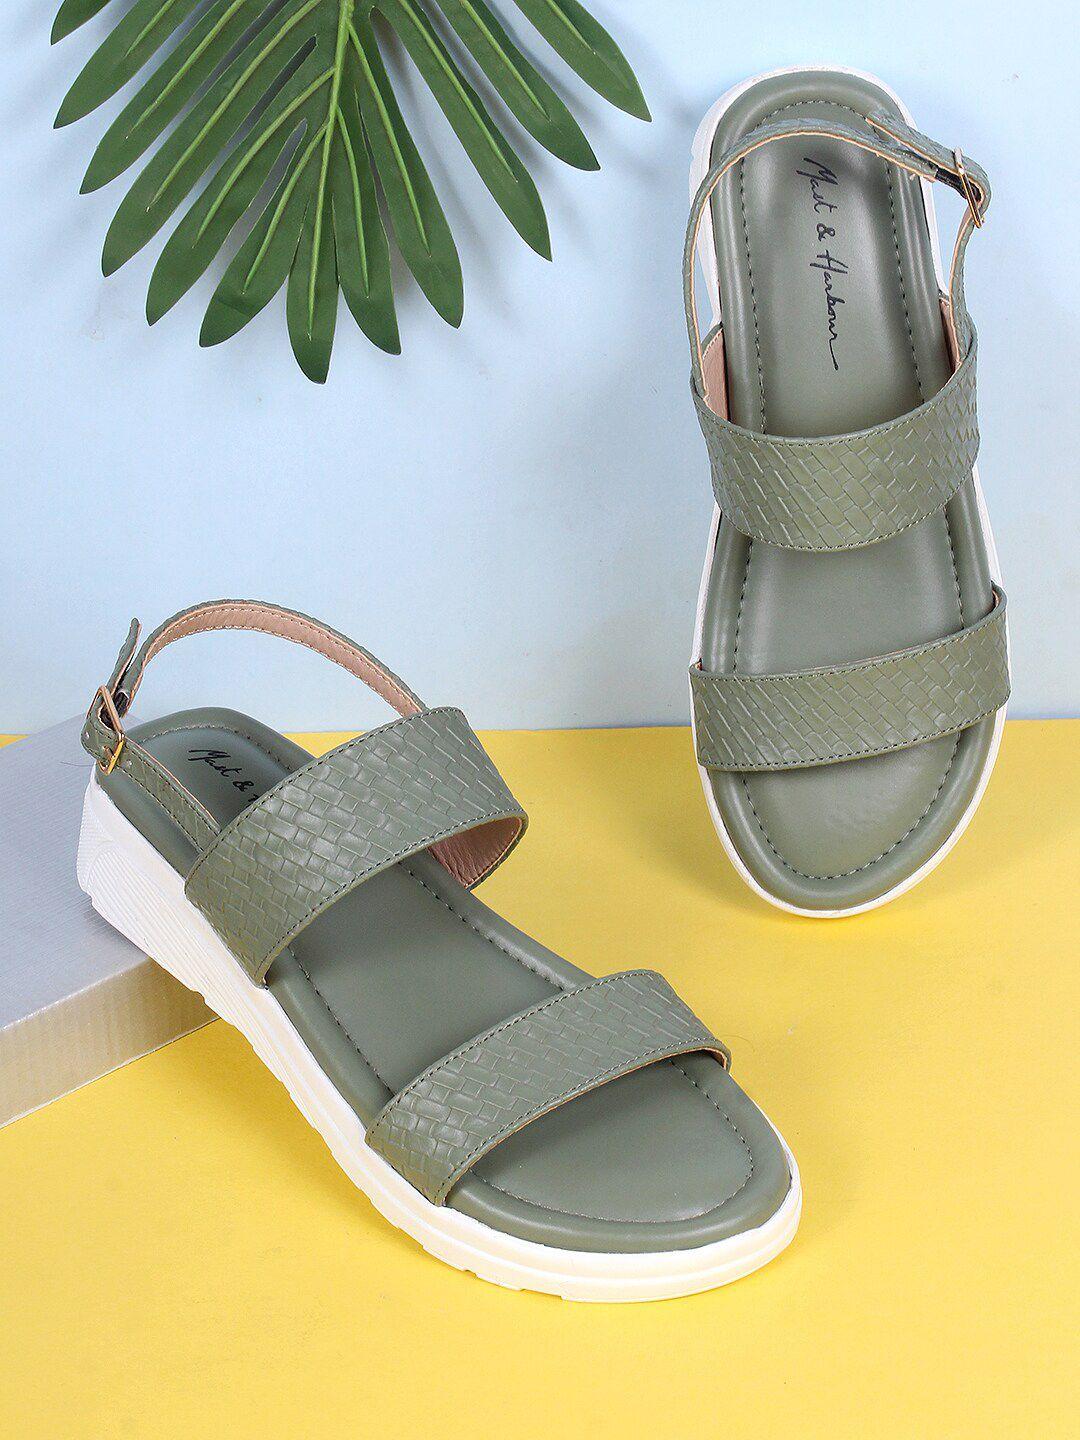 mast & harbour olive green and white textured comfort heels